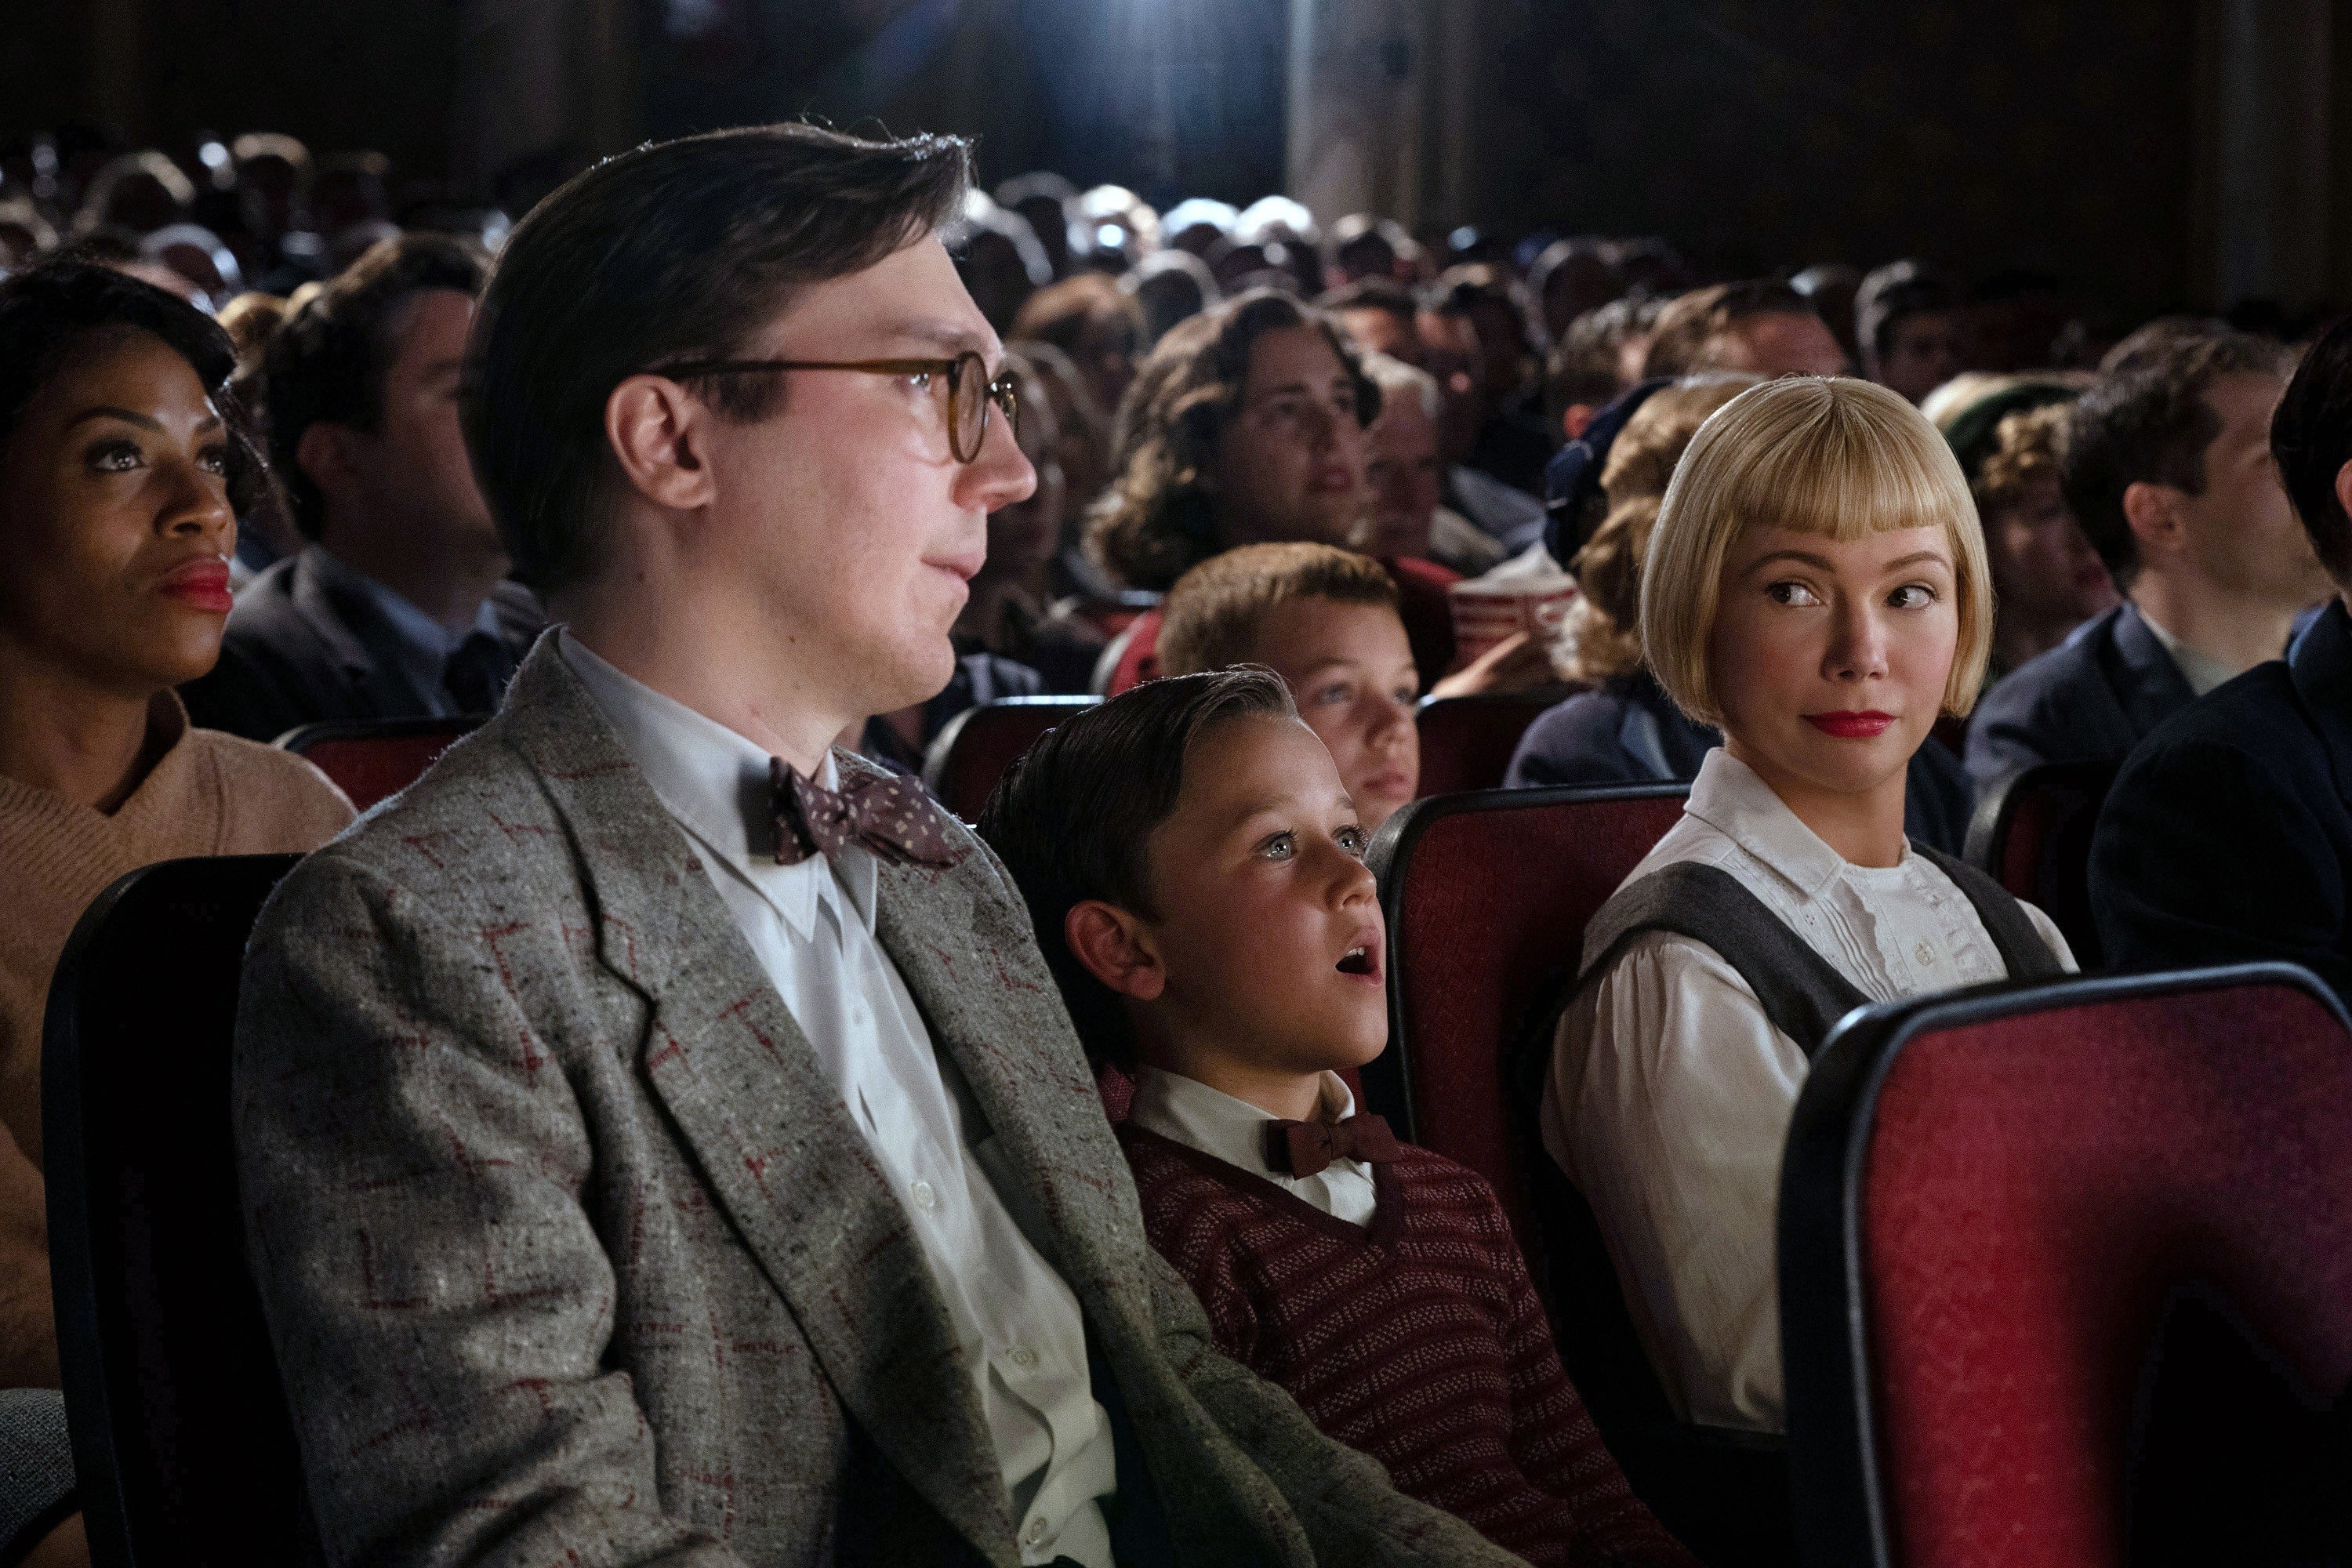 Paul Dano, Mateo Zoryon Francis-DeFord, and Michelle Williams sit in movie theater chairs